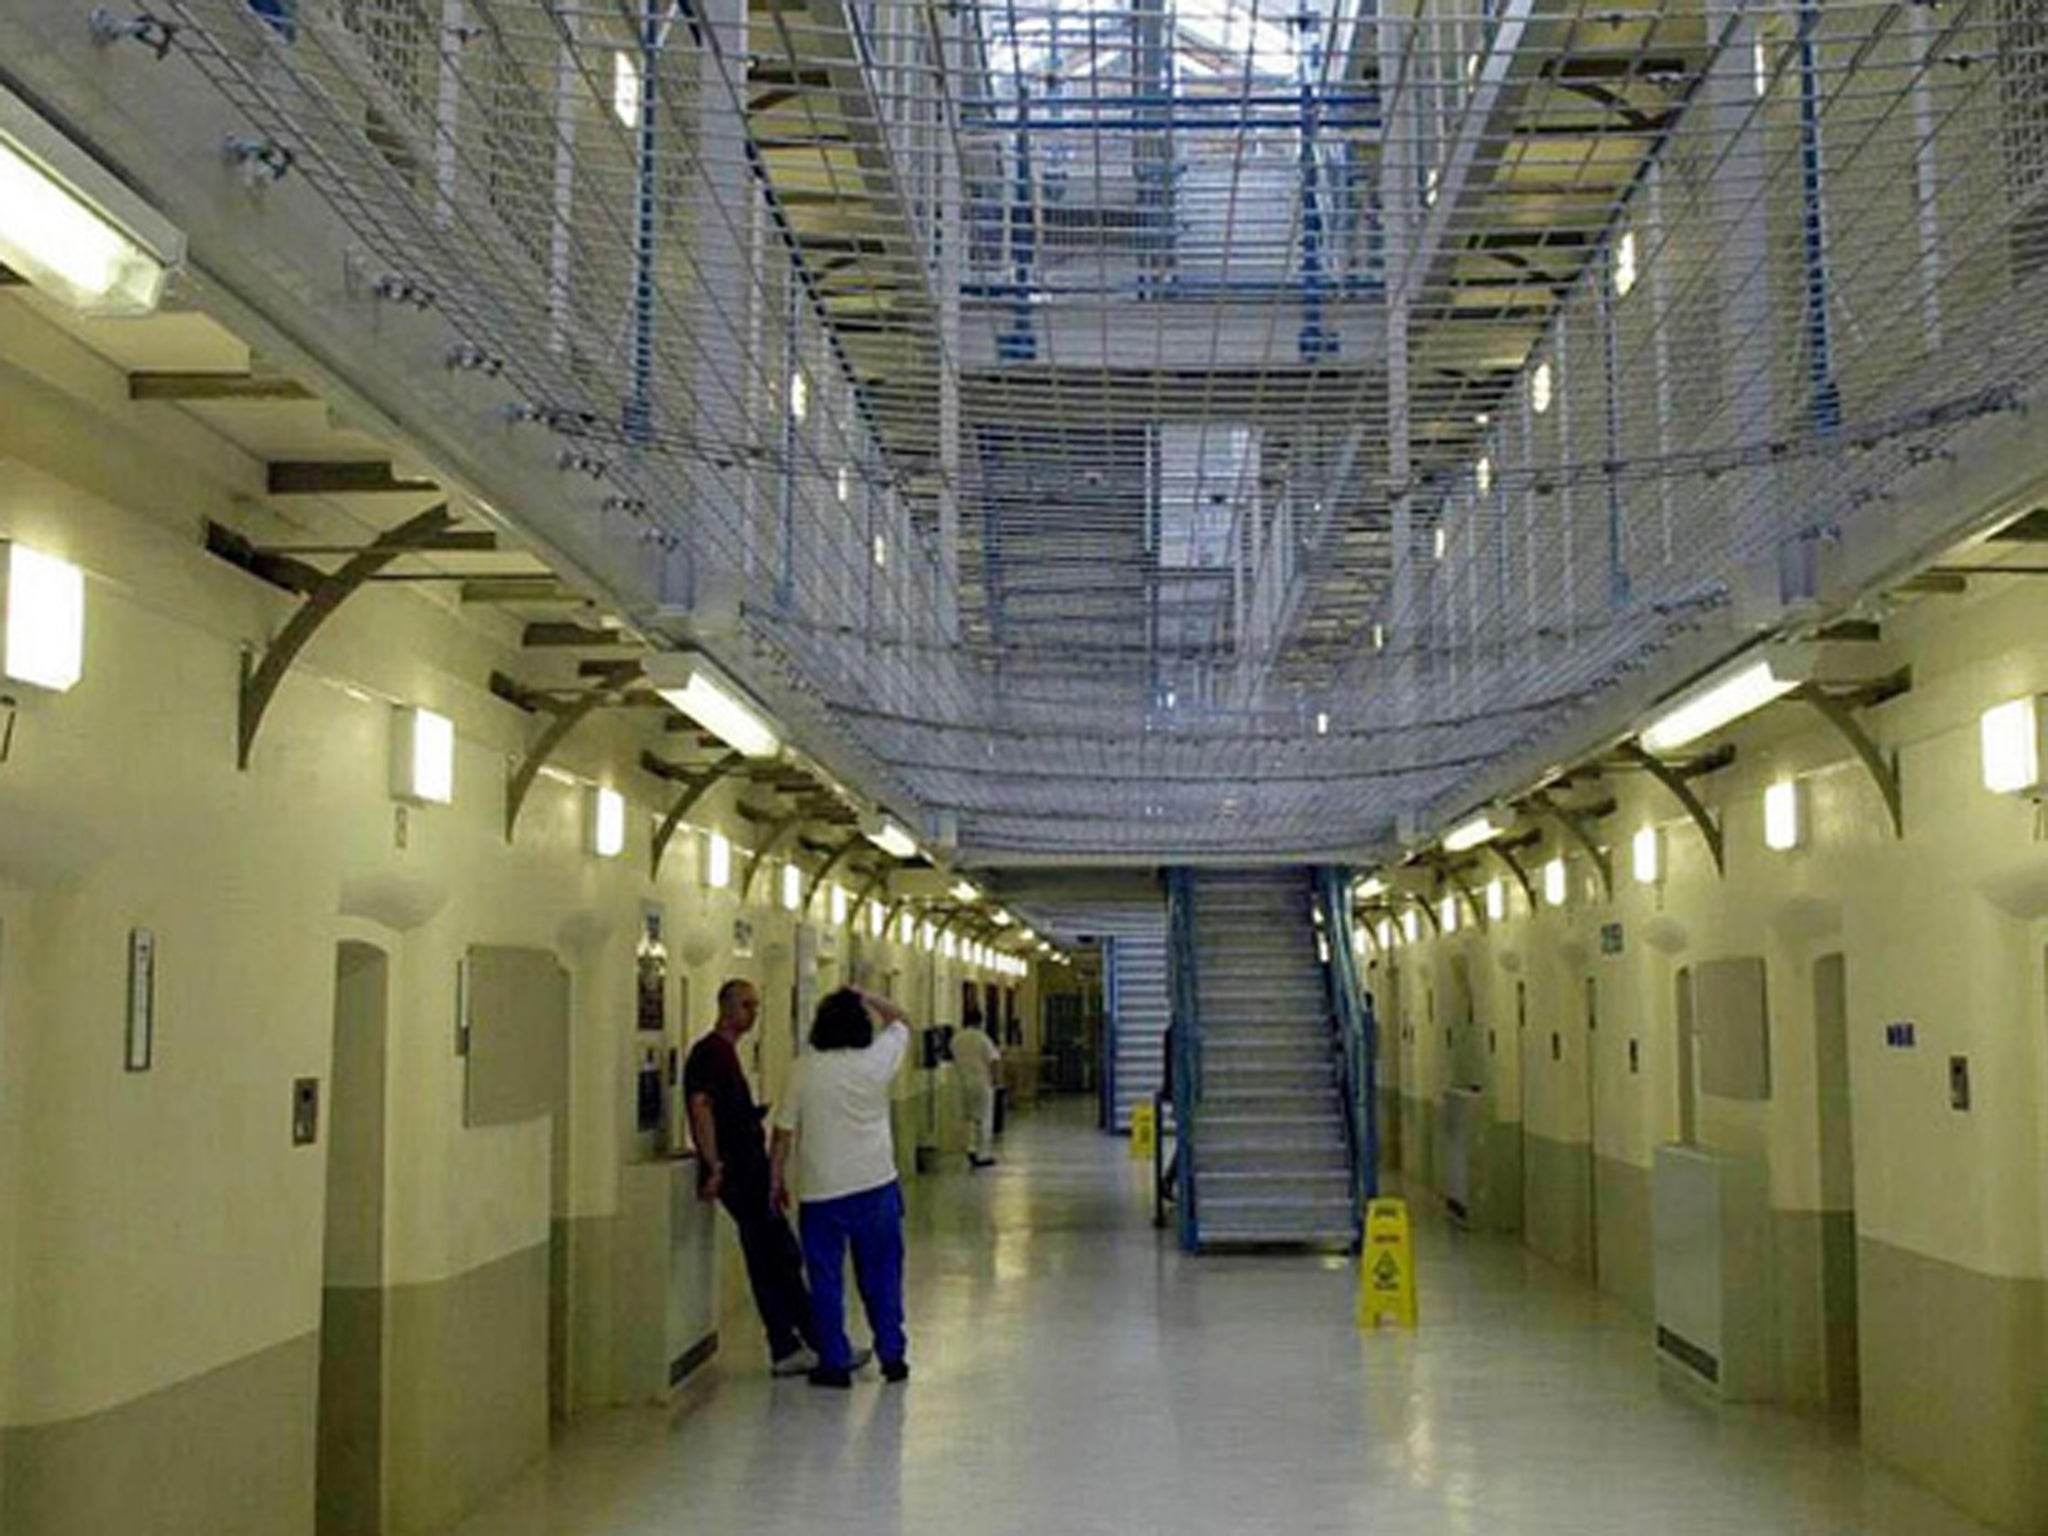 Cannabis use in Brixton prison fuels 'bullying and intimidation' according to the report (file photo)